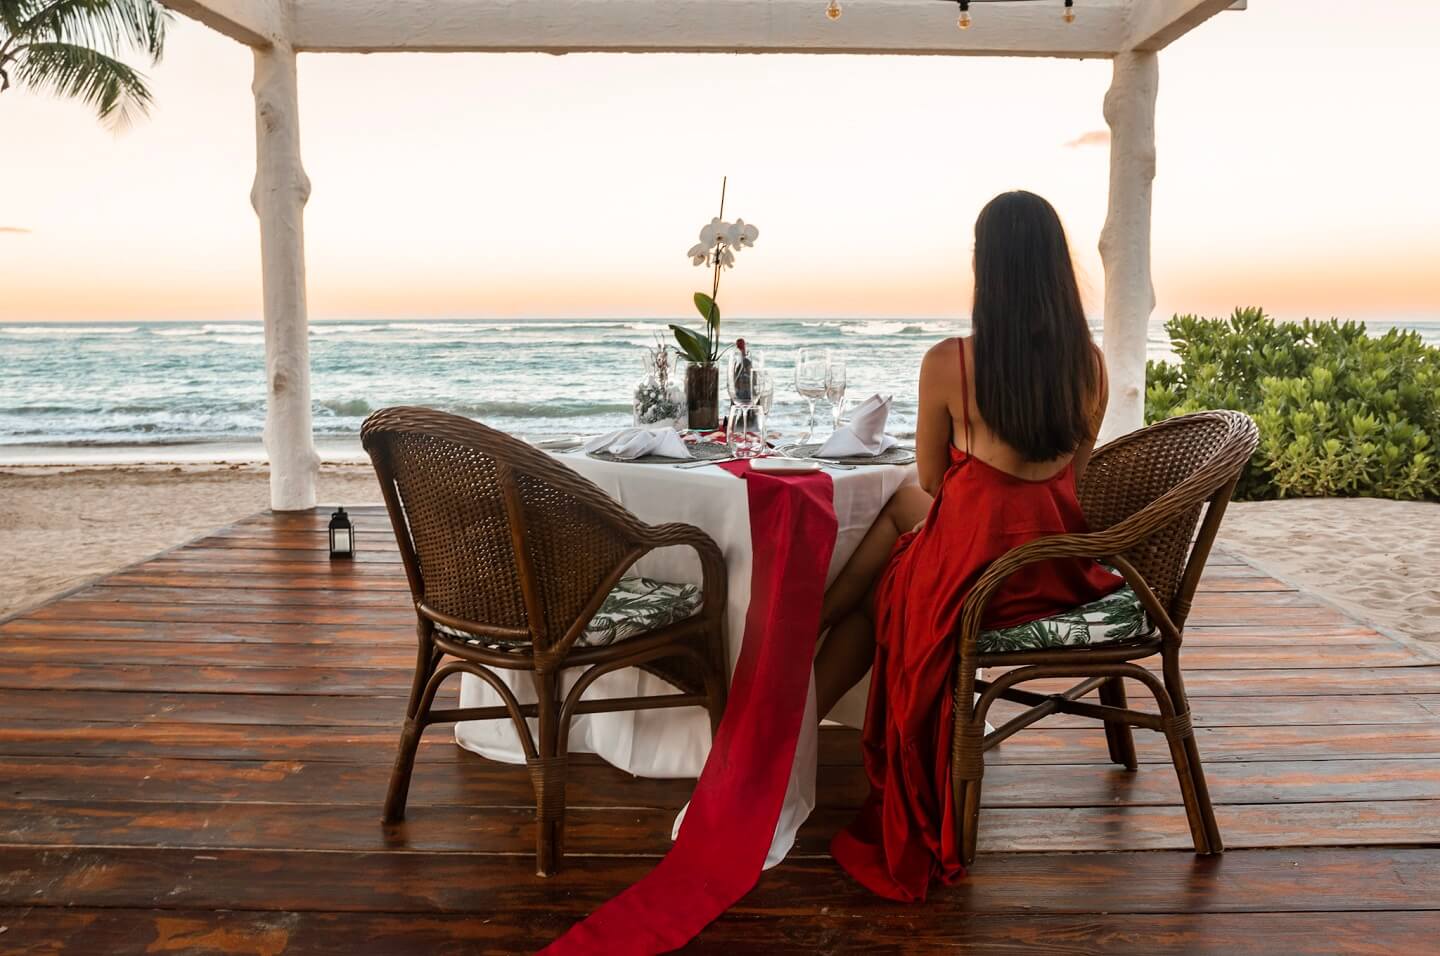 Romantic private dinner at the beach